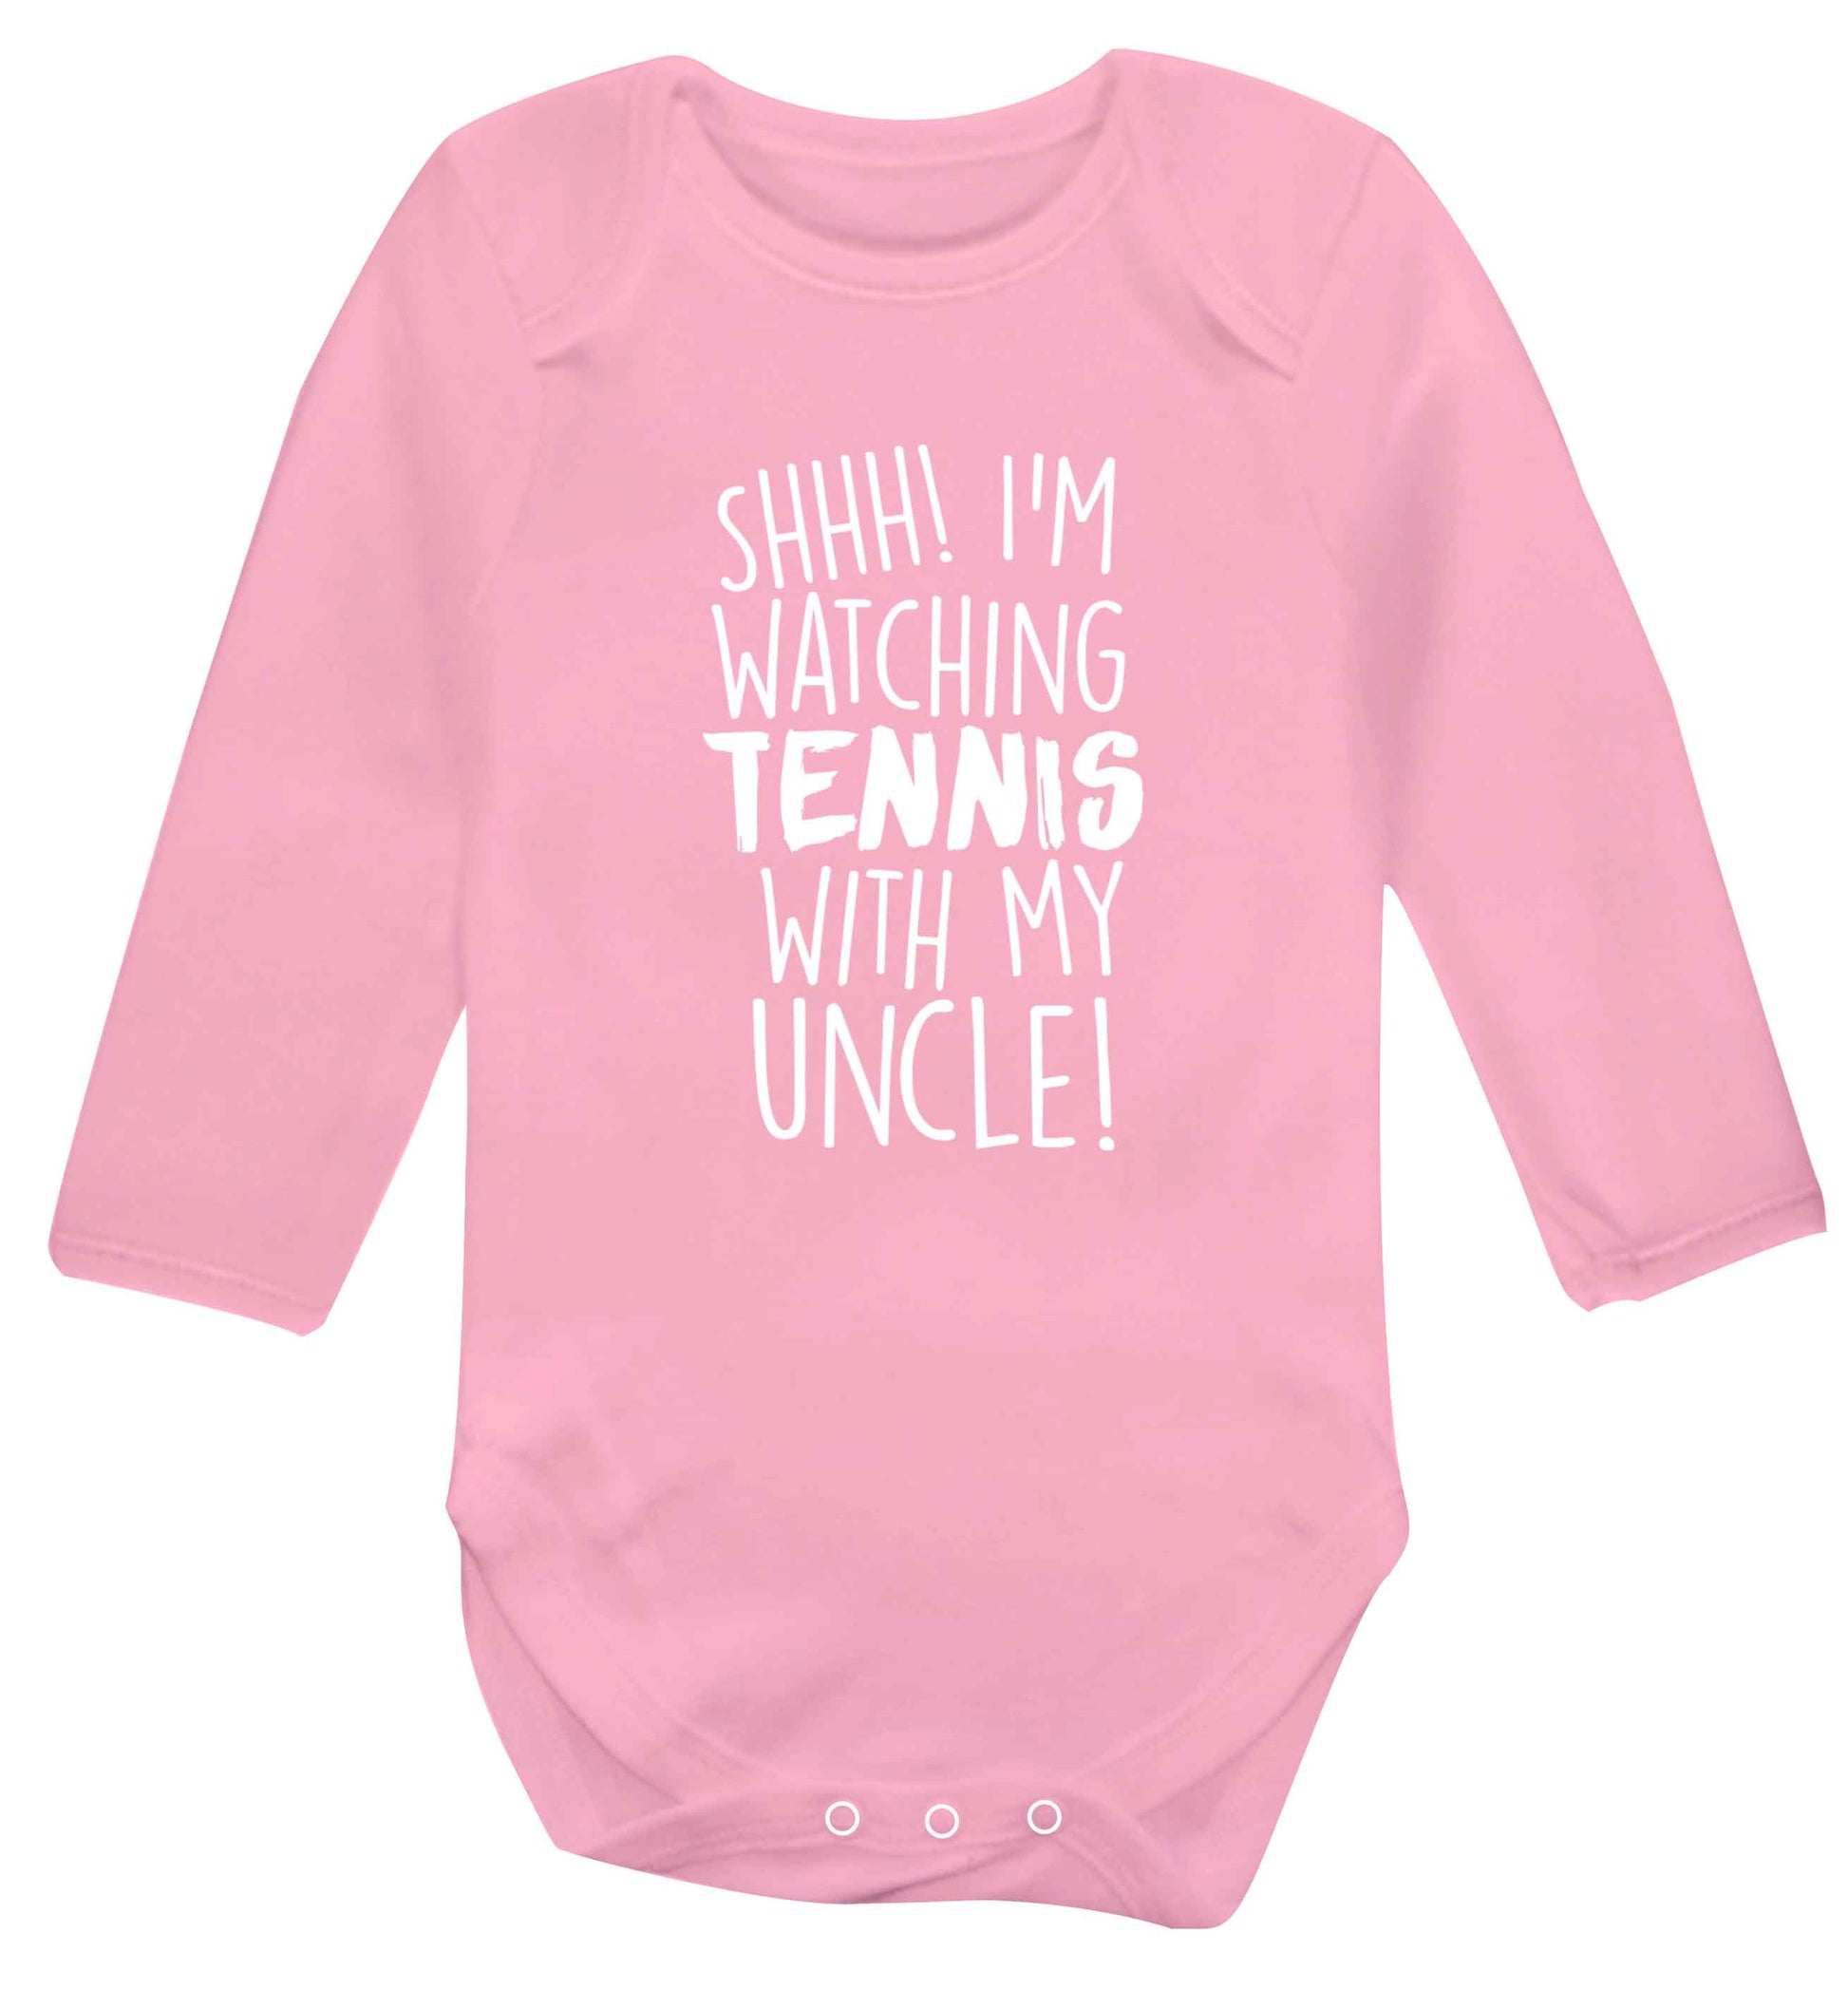 Shh! I'm watching tennis with my uncle! Baby Vest long sleeved pale pink 6-12 months